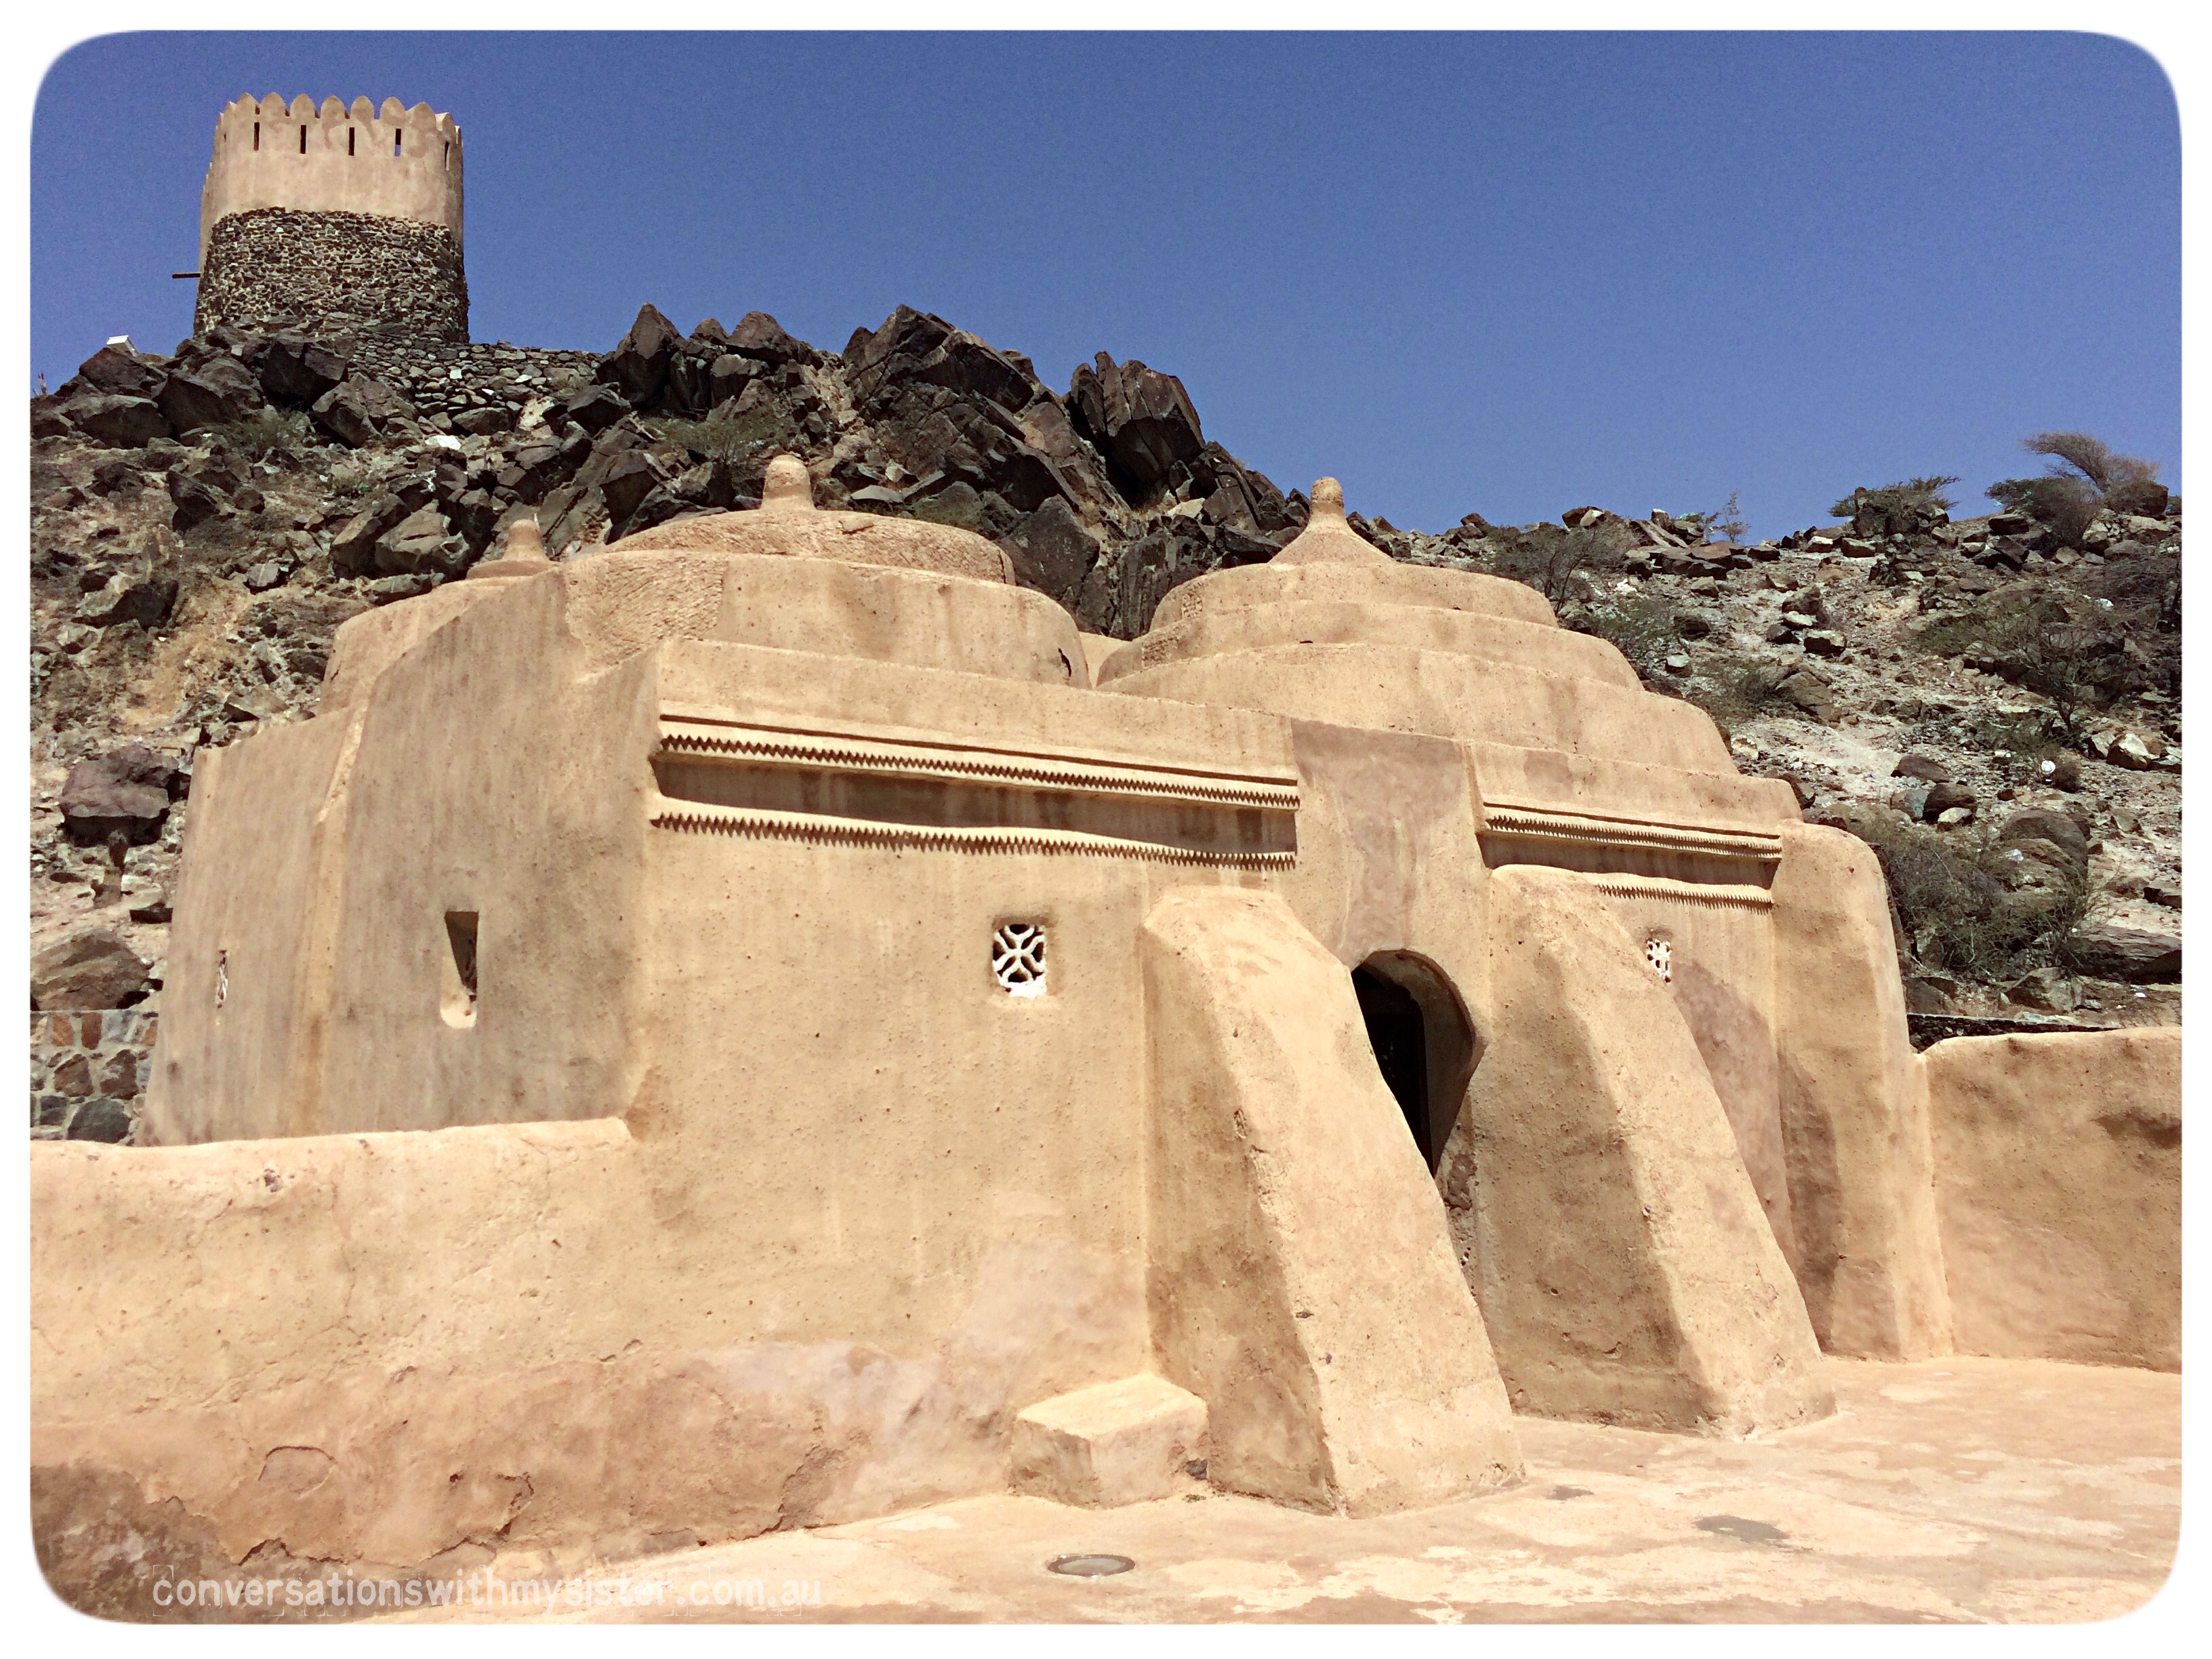 Visiting Fujairah means enjoying a broad range of activities. From snorkelling to visiting historic buildings - including the UAE's oldest & quaint mosque.